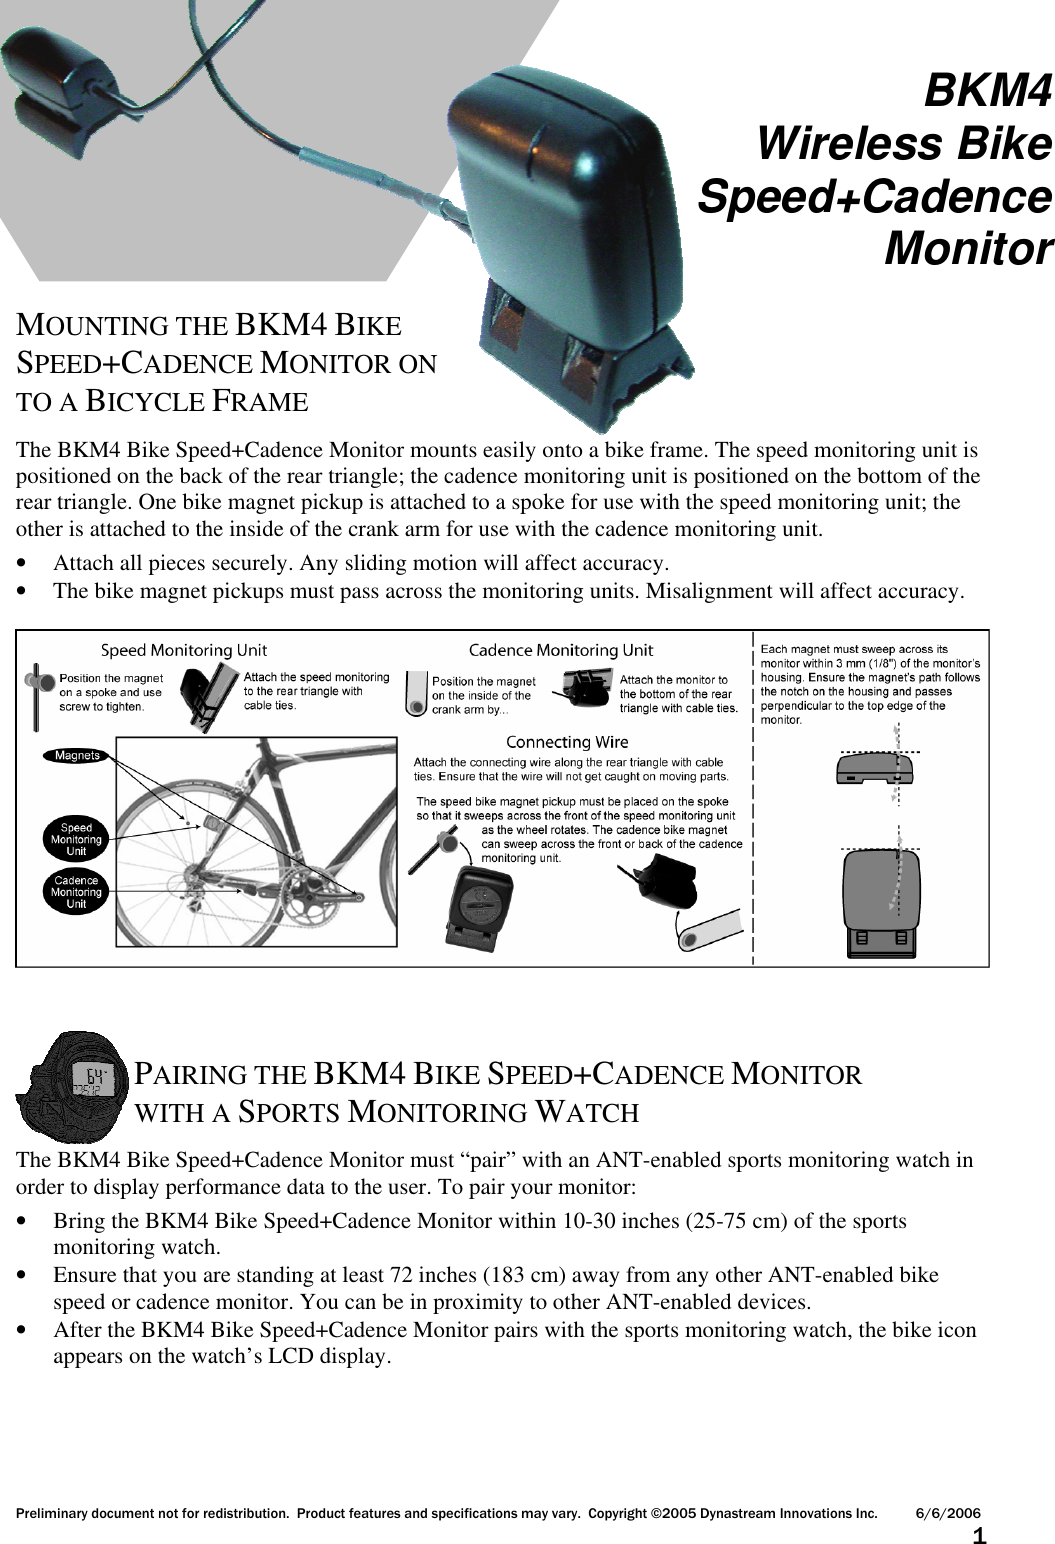 Preliminary document not for redistribution.  Product features and specifications may vary.  Copyright ©2005 Dynastream Innovations Inc. 6/6/2006                      1      MOUNTING THE BKM4 BIKE SPEED+CADENCE MONITOR ON TO A BICYCLE FRAME  The BKM4 Bike Speed+Cadence Monitor mounts easily onto a bike frame. The speed monitoring unit is positioned on the back of the rear triangle; the cadence monitoring unit is positioned on the bottom of the rear triangle. One bike magnet pickup is attached to a spoke for use with the speed monitoring unit; the other is attached to the inside of the crank arm for use with the cadence monitoring unit. • Attach all pieces securely. Any sliding motion will affect accuracy. • The bike magnet pickups must pass across the monitoring units. Misalignment will affect accuracy.       PAIRING THE BKM4 BIKE SPEED+CADENCE MONITOR WITH A SPORTS MONITORING WATCH  The BKM4 Bike Speed+Cadence Monitor must “pair” with an ANT-enabled sports monitoring watch in order to display performance data to the user. To pair your monitor: • Bring the BKM4 Bike Speed+Cadence Monitor within 10-30 inches (25-75 cm) of the sports monitoring watch. • Ensure that you are standing at least 72 inches (183 cm) away from any other ANT-enabled bike speed or cadence monitor. You can be in proximity to other ANT-enabled devices. • After the BKM4 Bike Speed+Cadence Monitor pairs with the sports monitoring watch, the bike icon appears on the watch’s LCD display. BKM4 Wireless Bike Speed+Cadence Monitor 